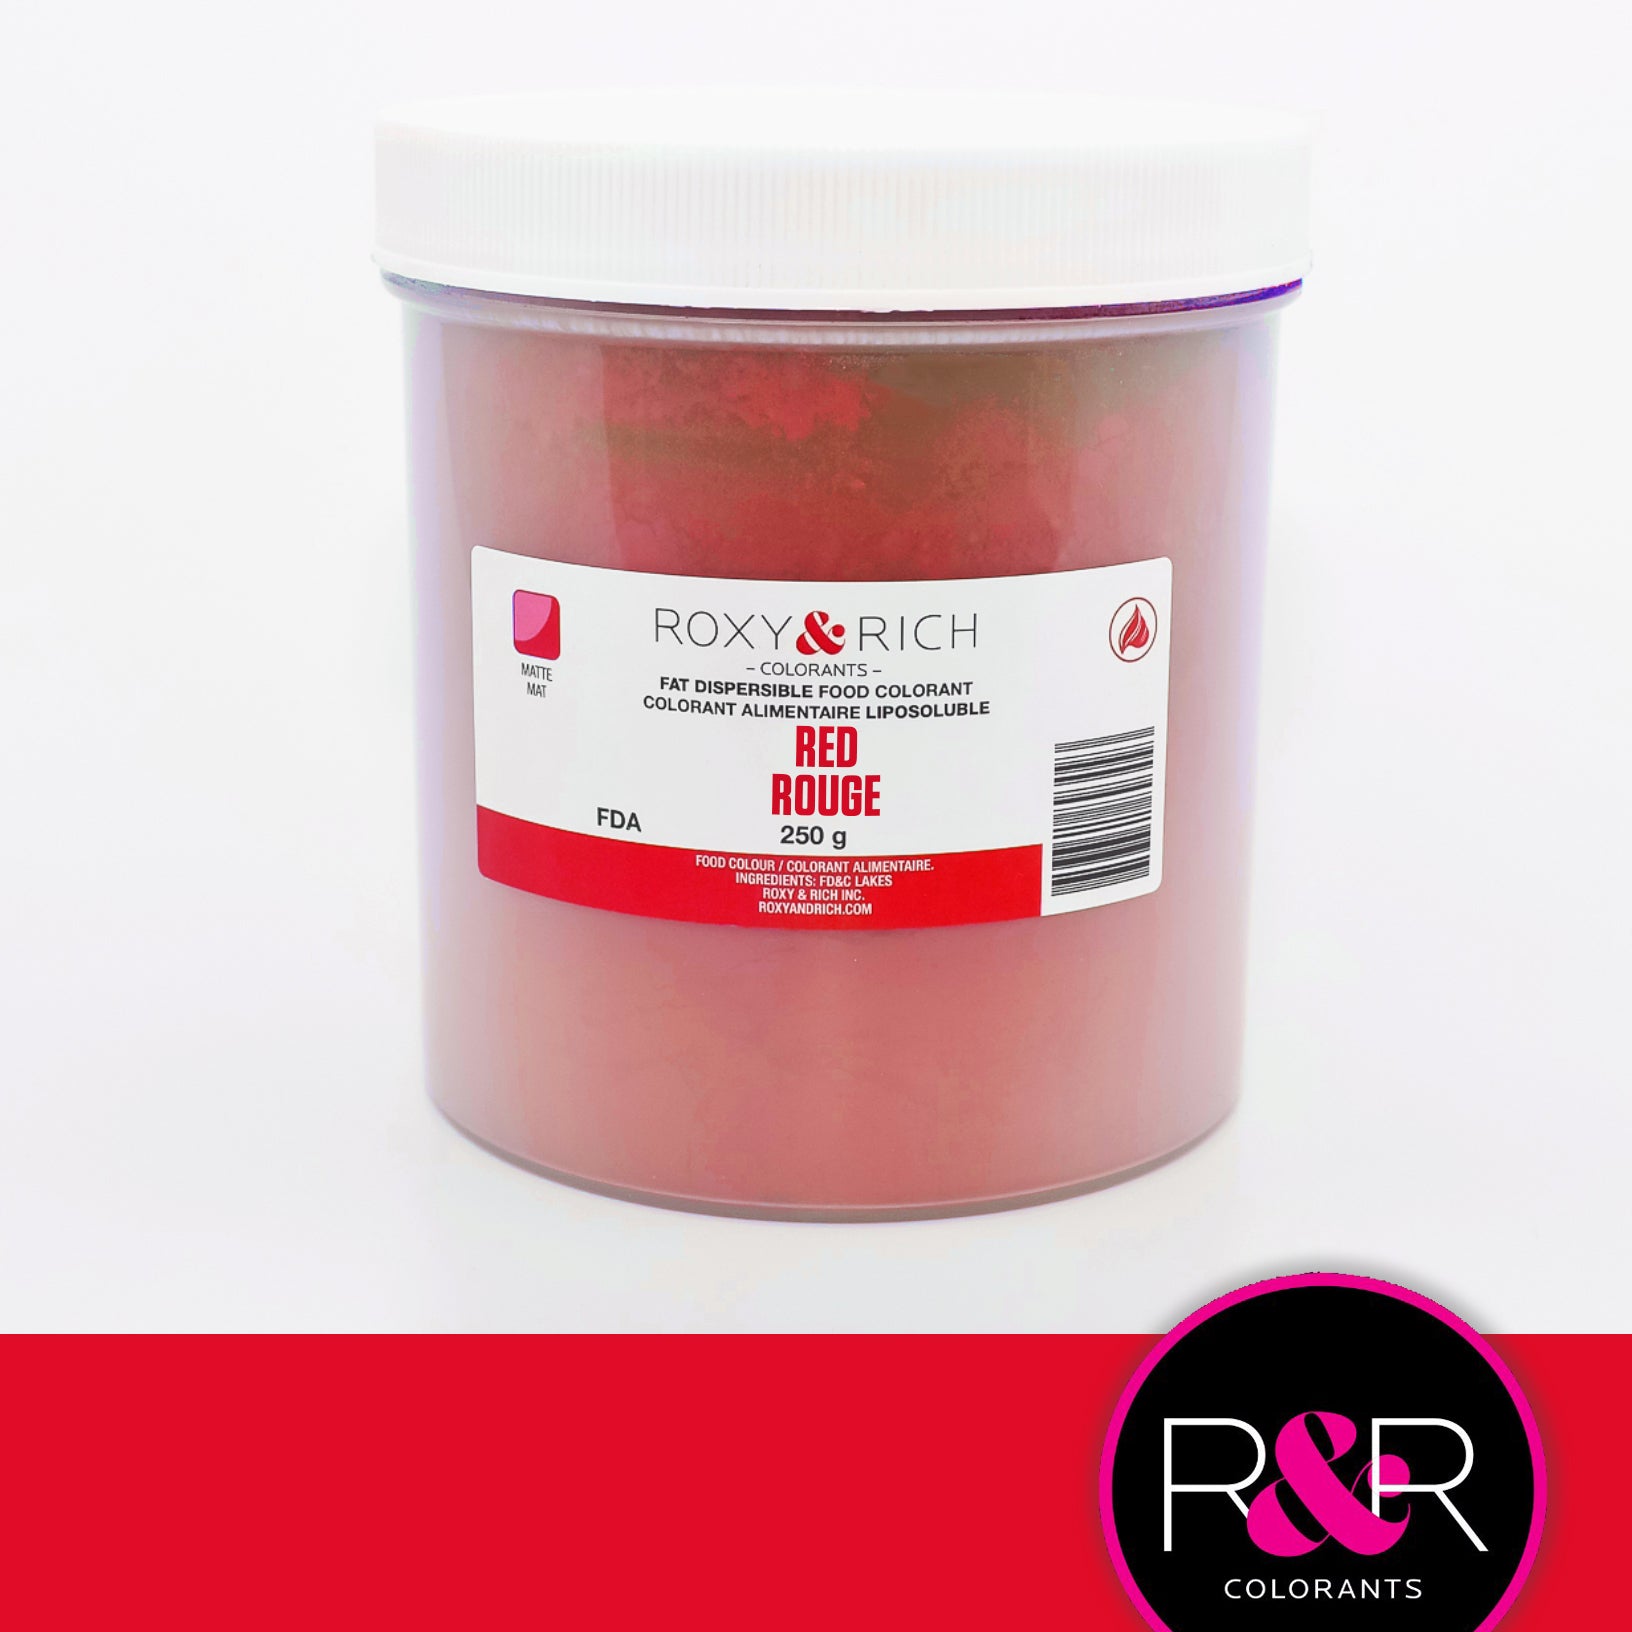 Colorant Alimentaire Liposoluble Rouge 250gr   - Roxy & Rich - Colorant alimentaire liposoluble - P250-B03